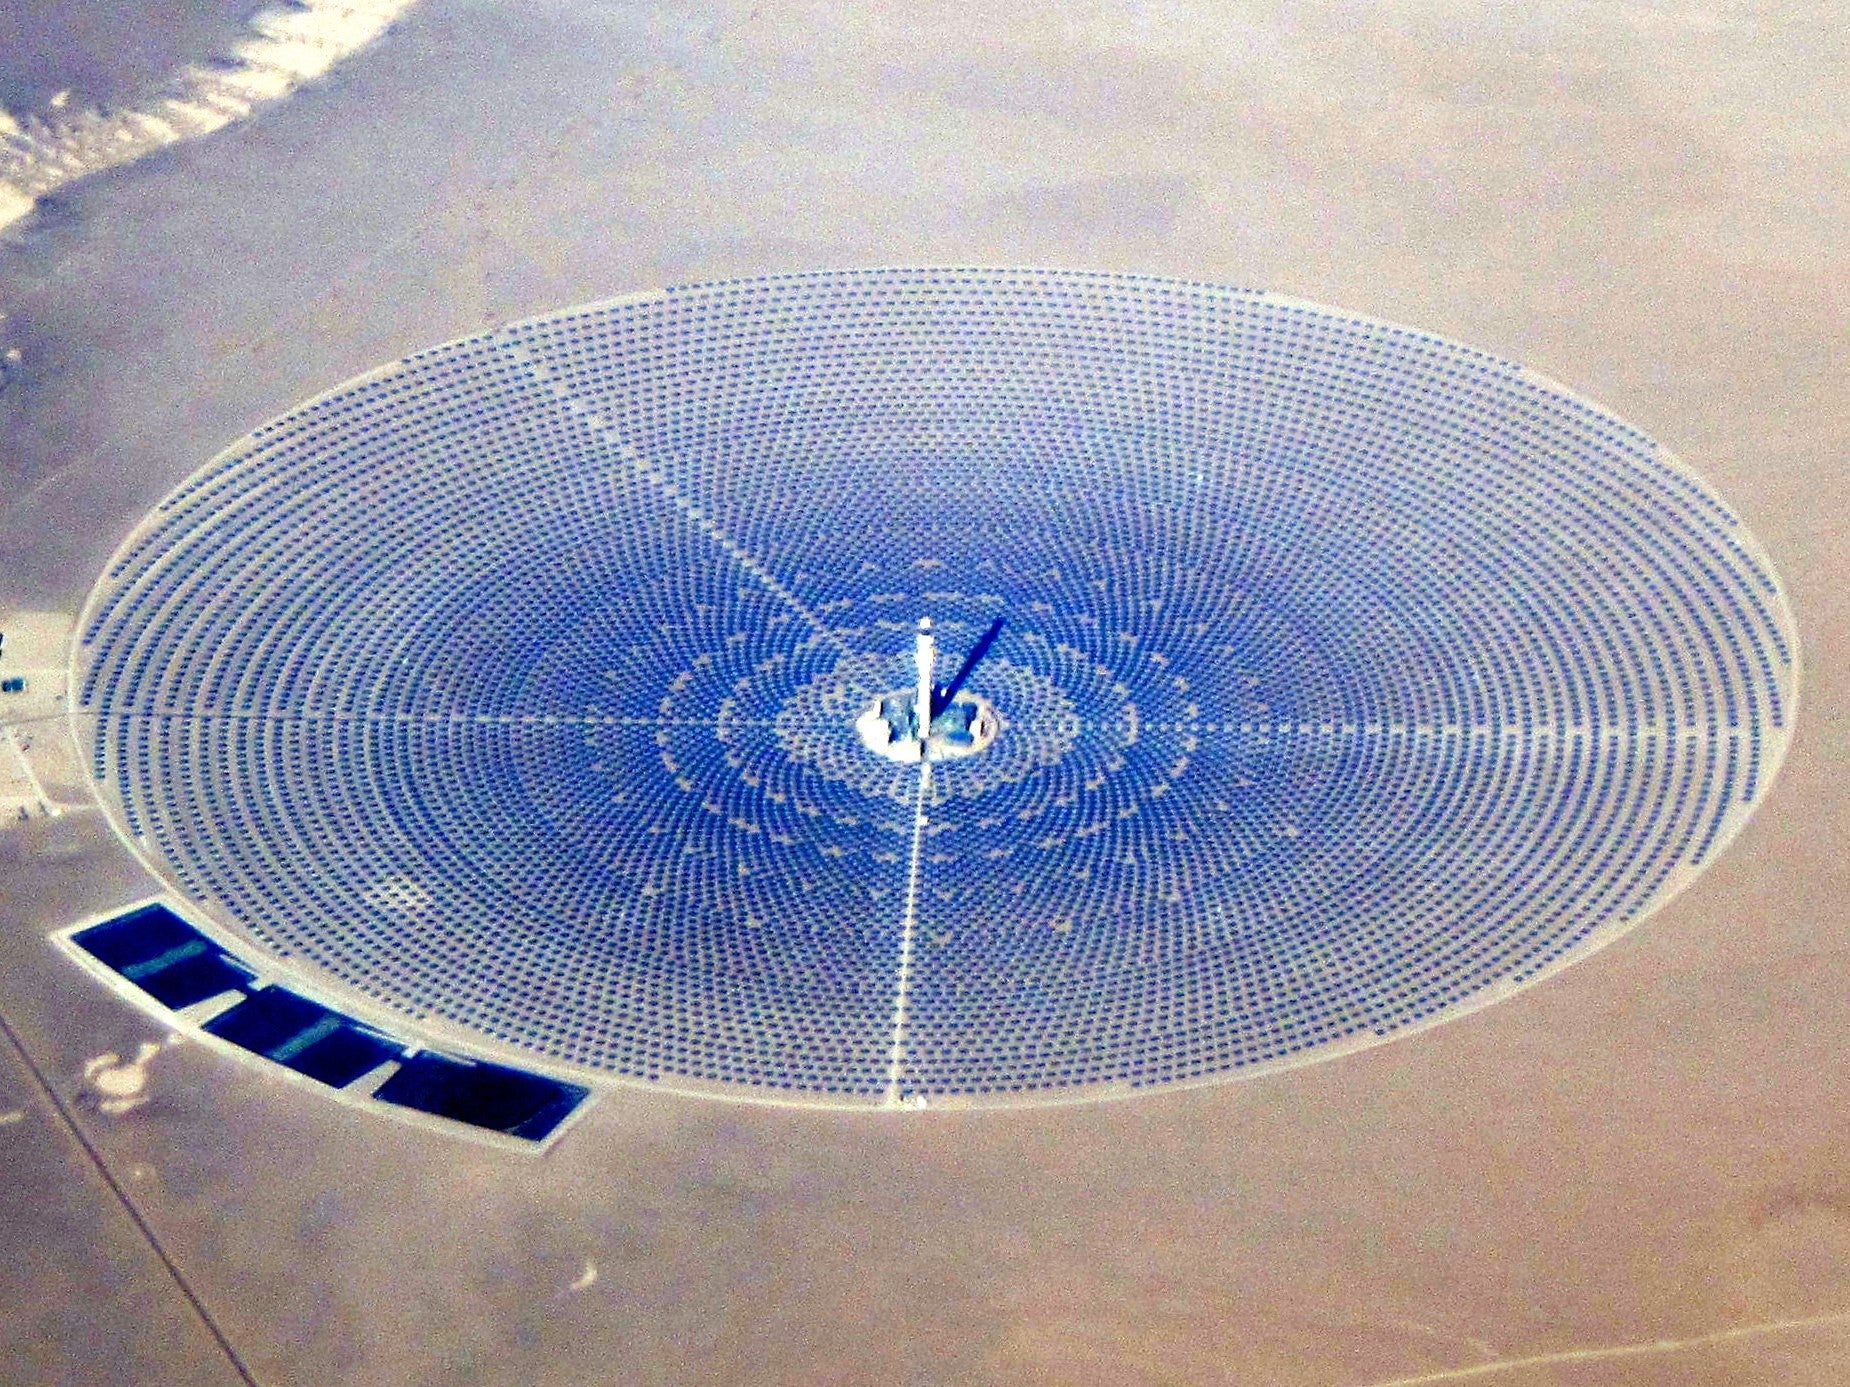 The Crescent Dunes Solar Energy Project in Nevada, US, as seen from an airliner